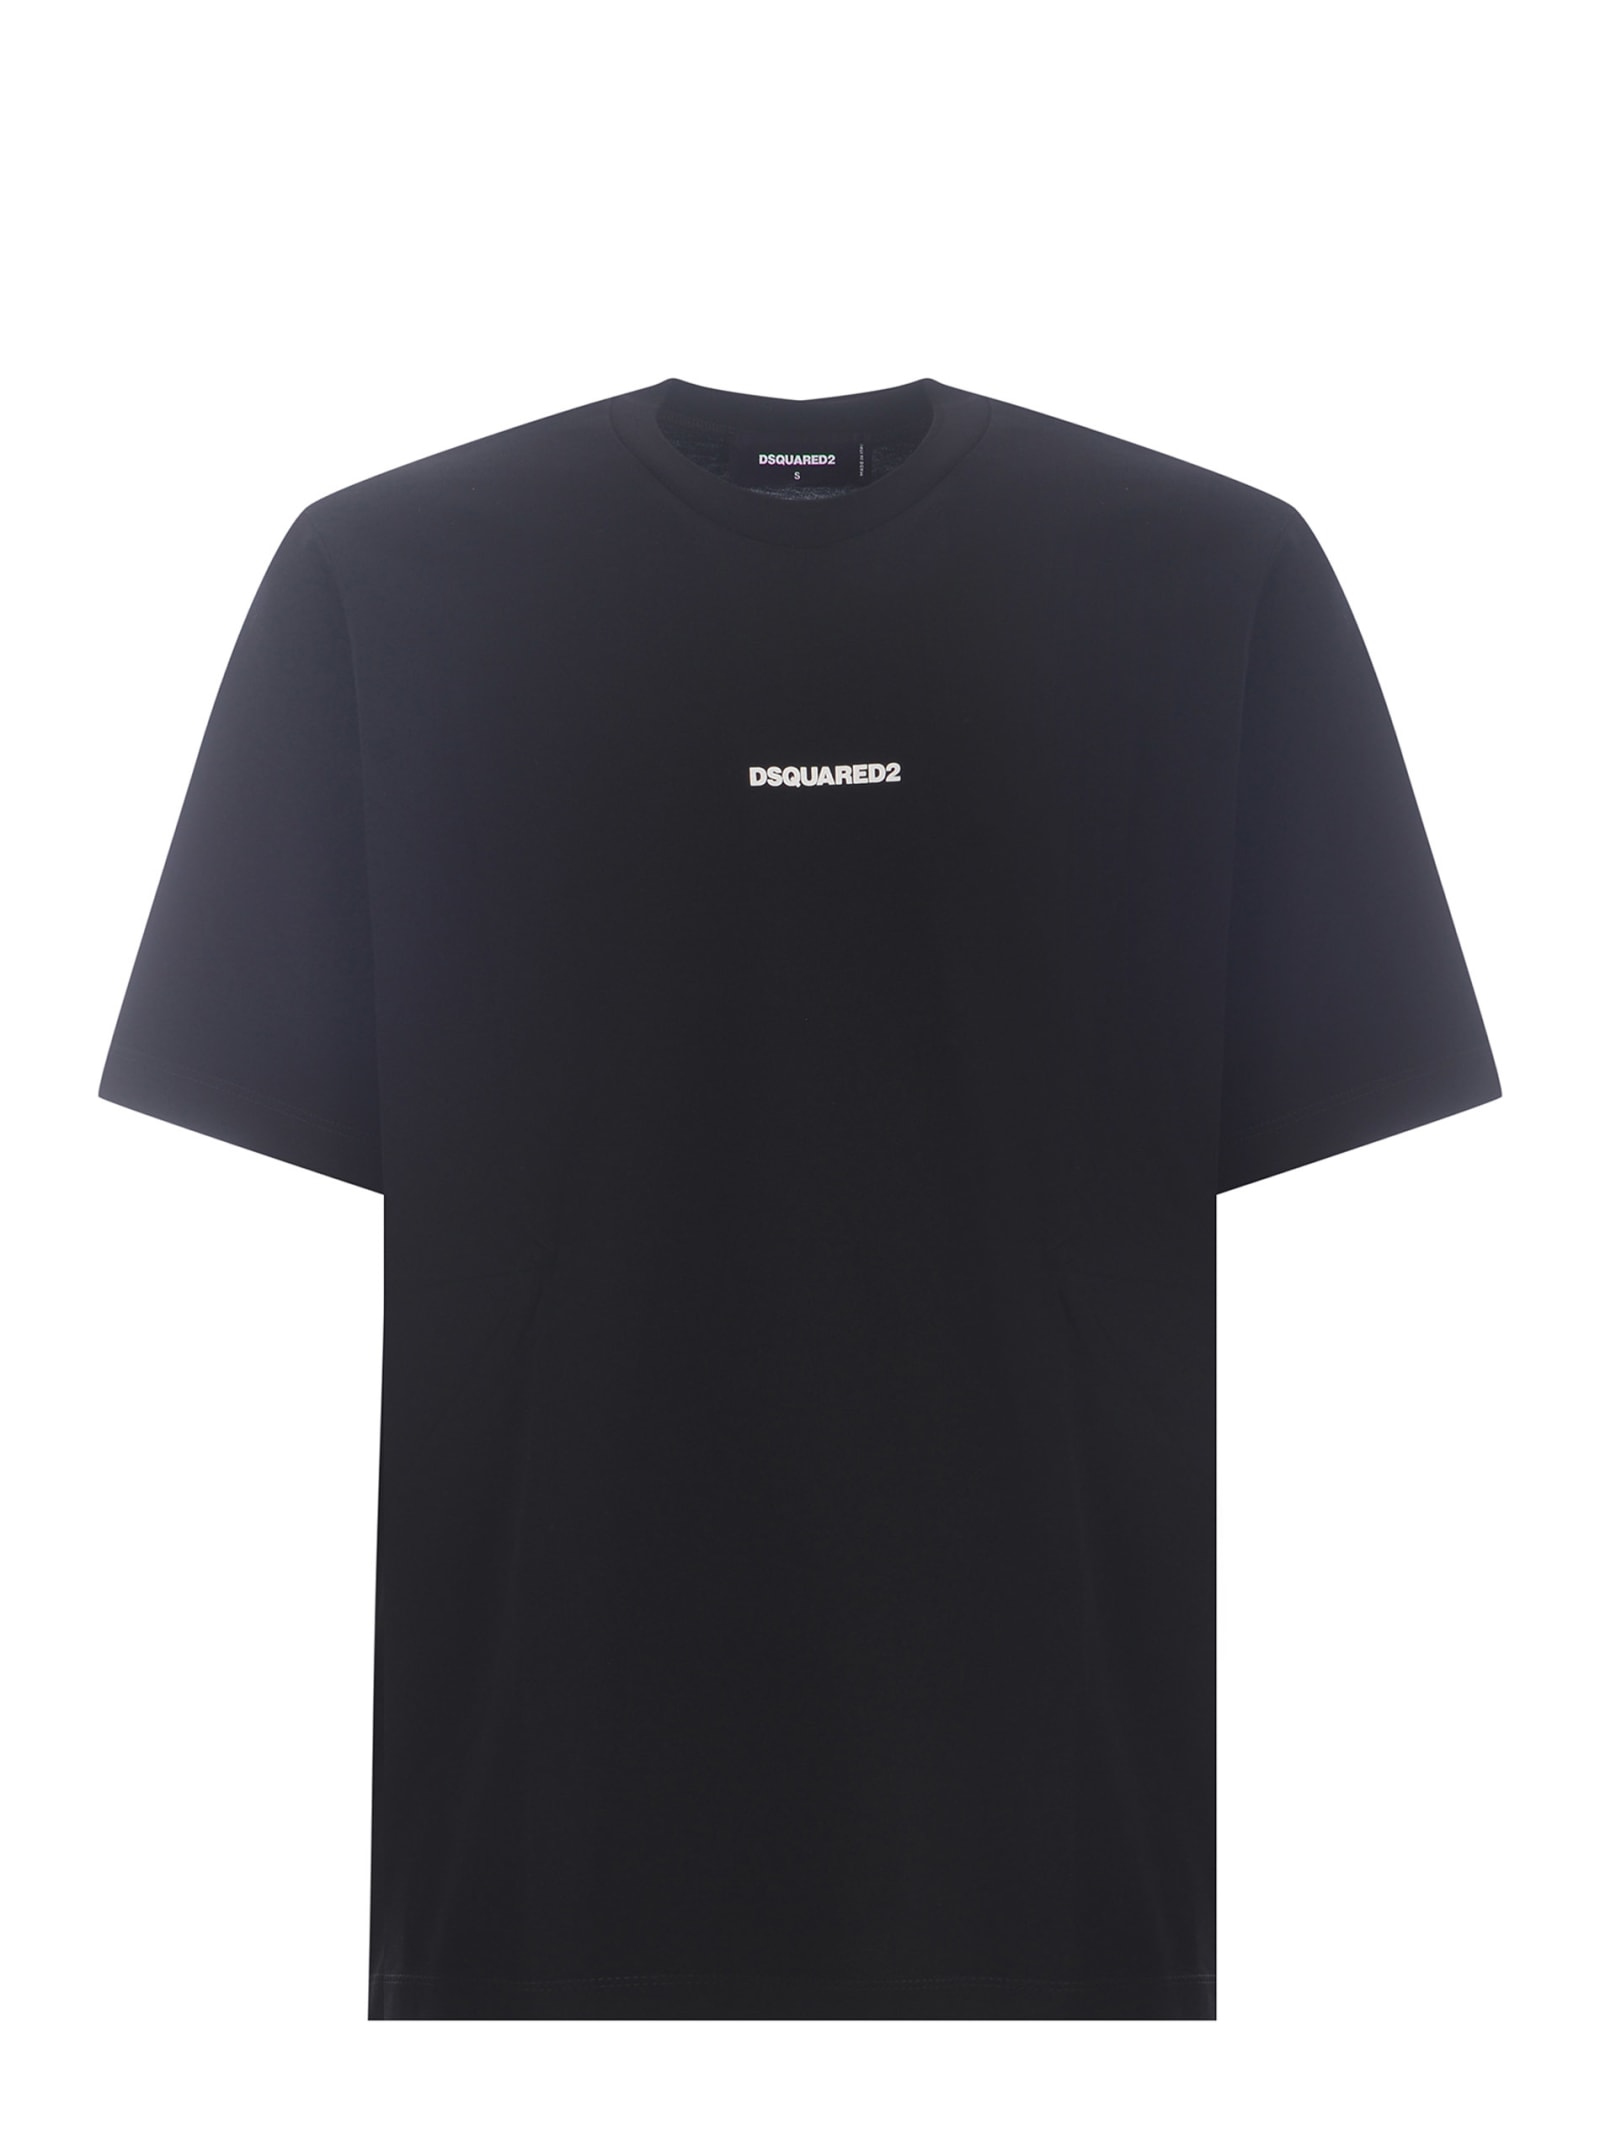 Dsquared2 T-shirt  Made Of Cotton Jersey In Black